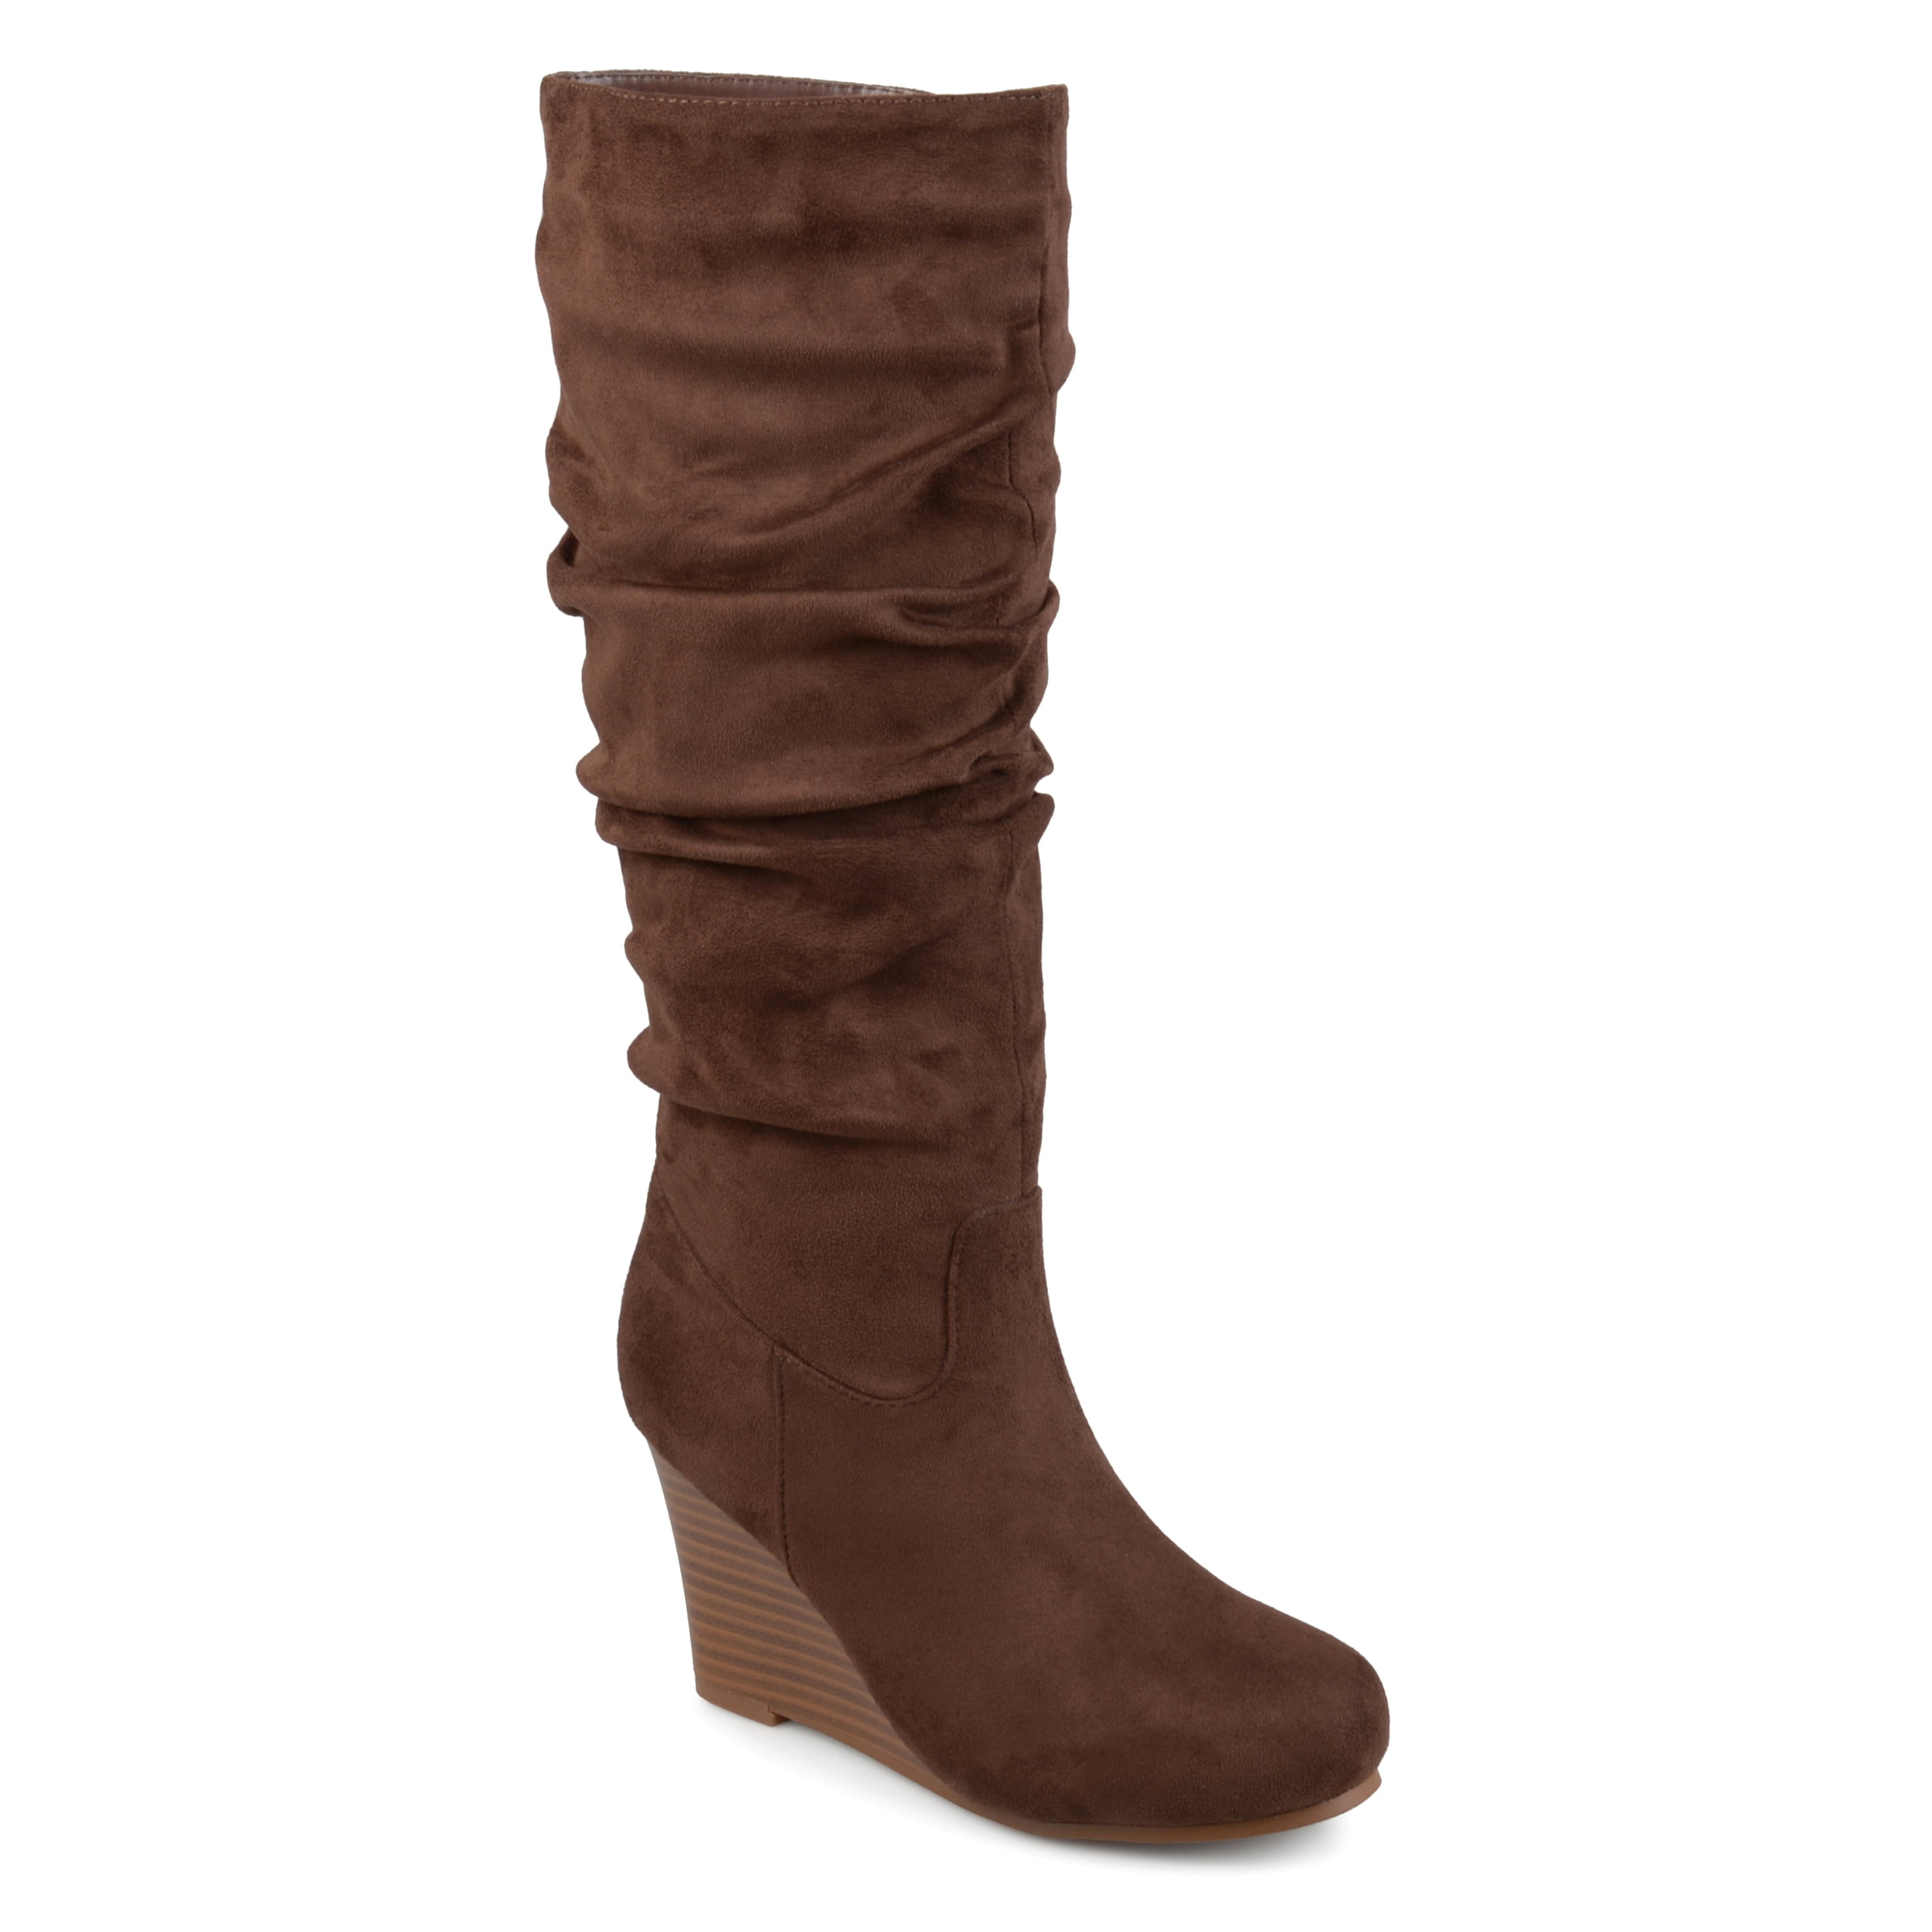 Women's Wide Calf Slouchy Faux Suede Mid-calf Wedge Boots